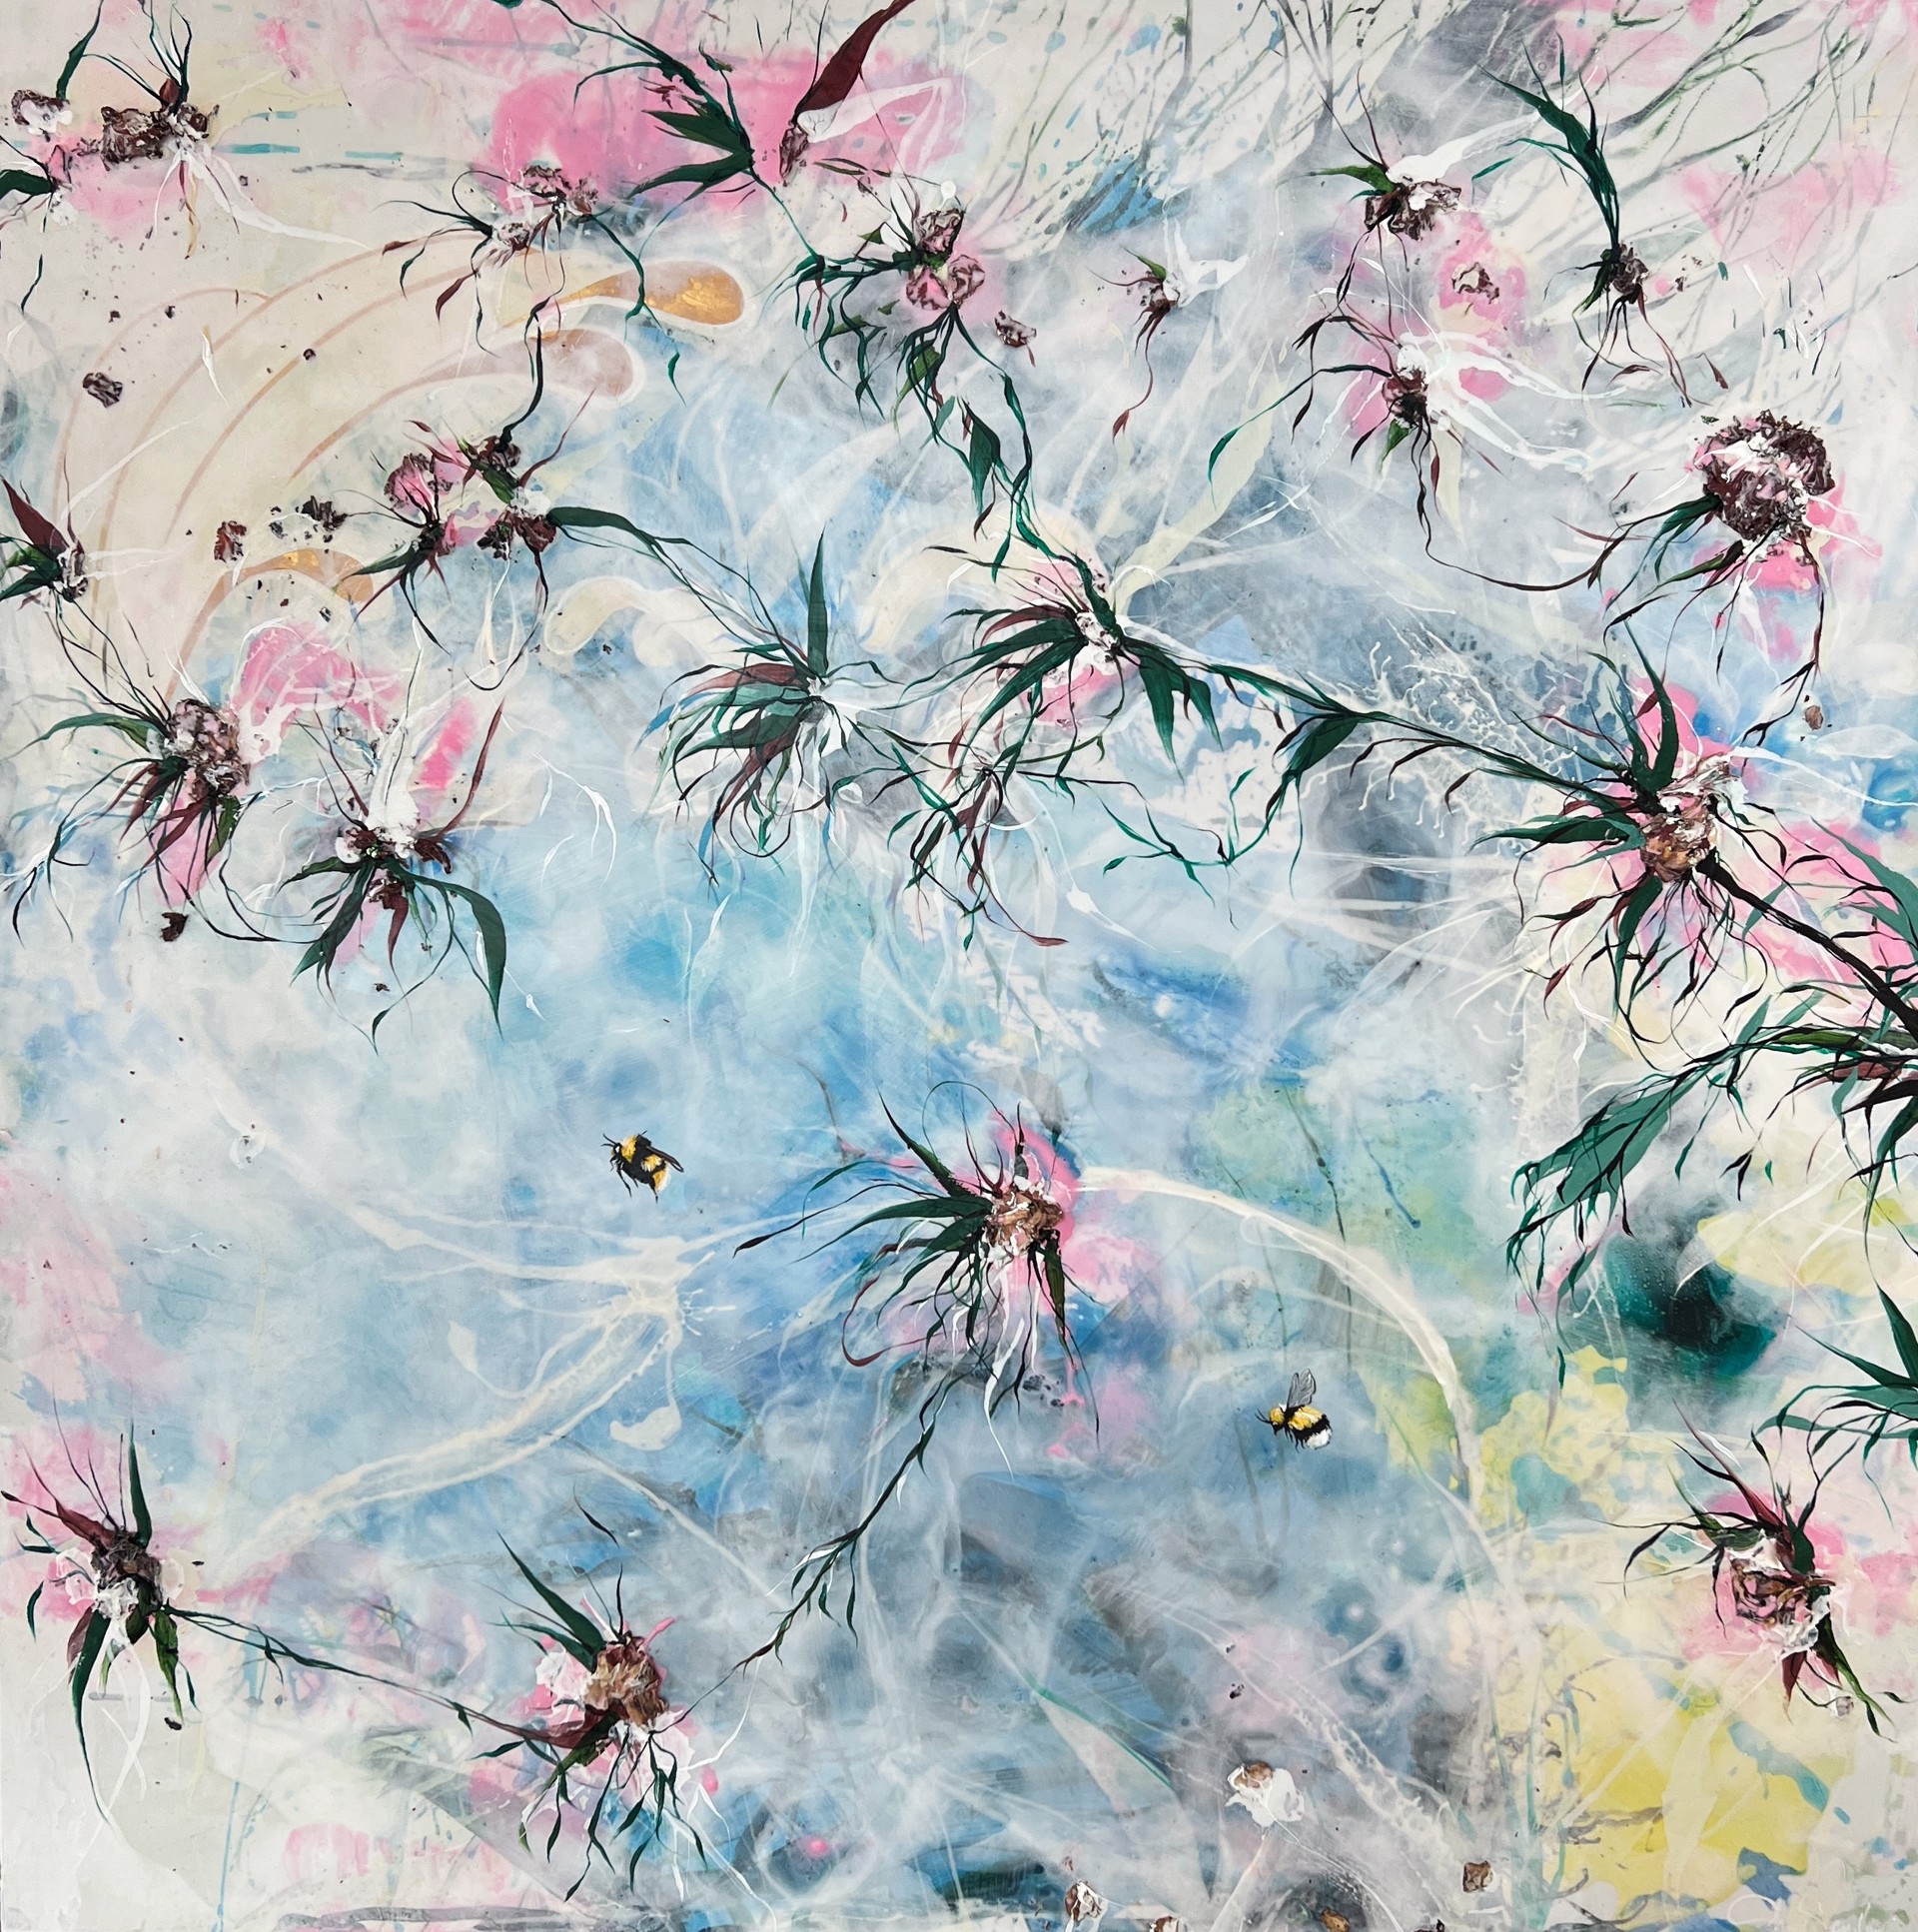 A painting with a blue and white background with black and pink vine-like flowers overtop of it